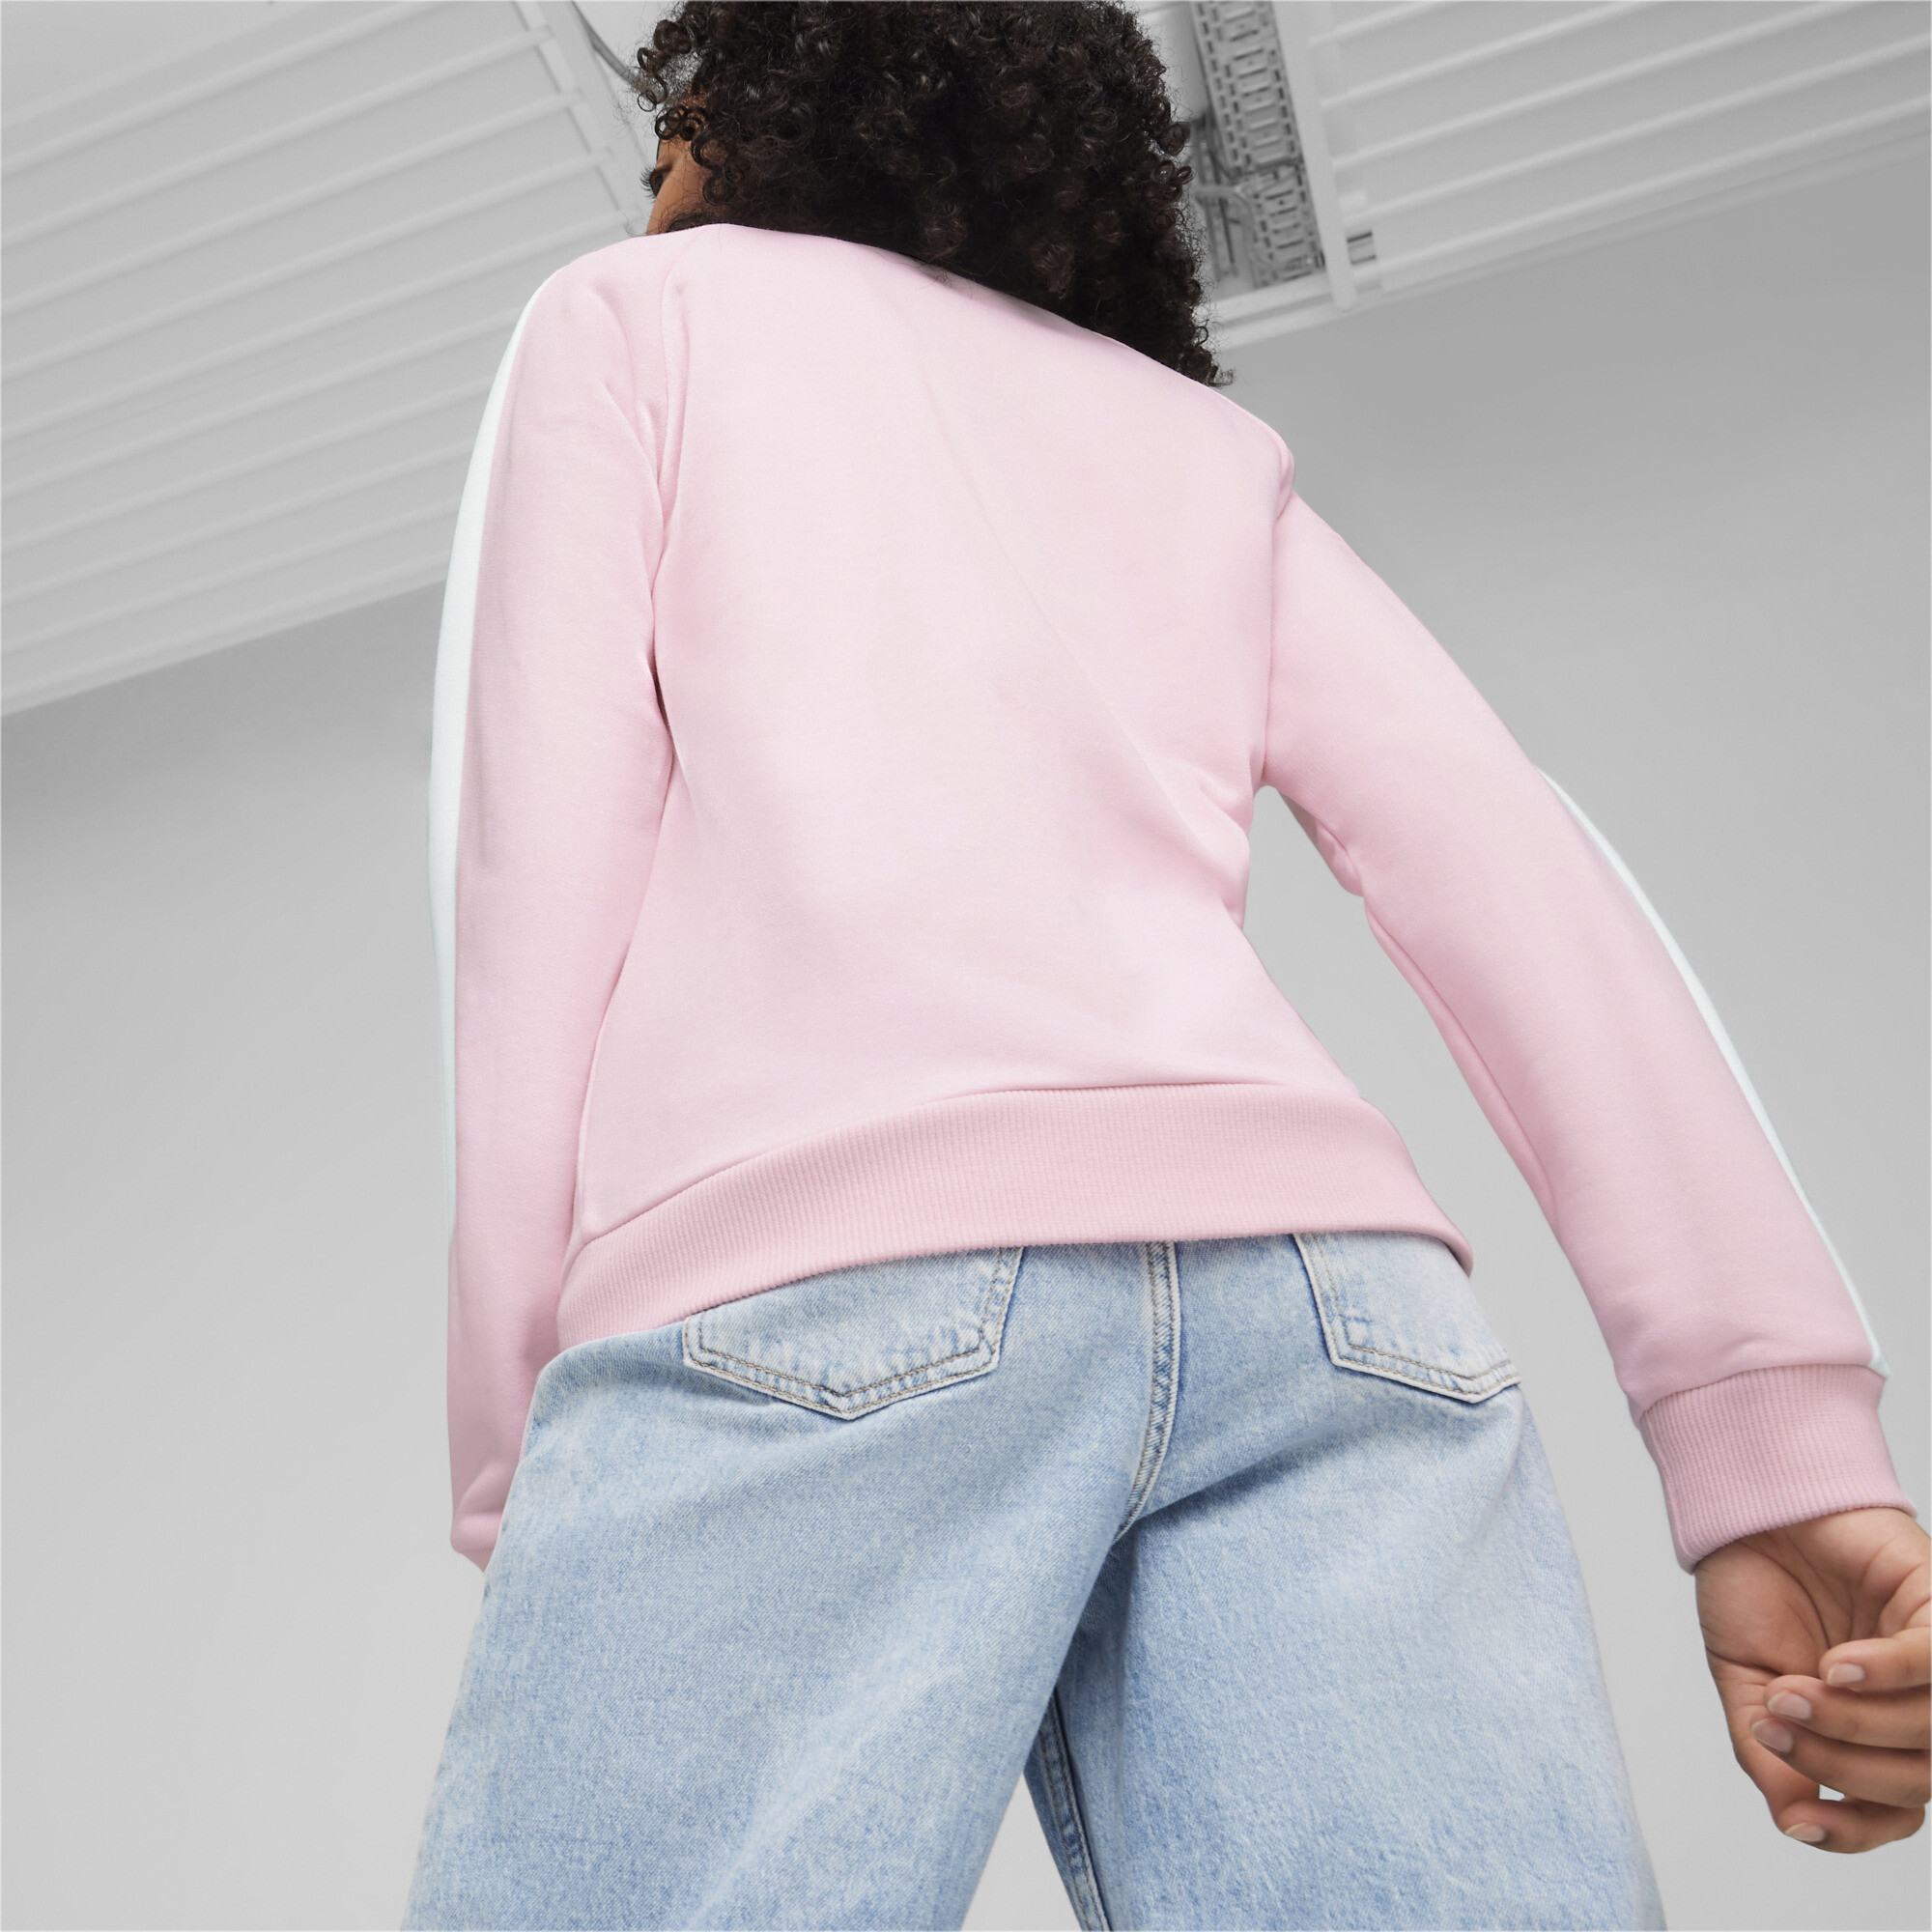 PUMA Classics T7 Track Jacket In Pink, Size 4-5 Youth